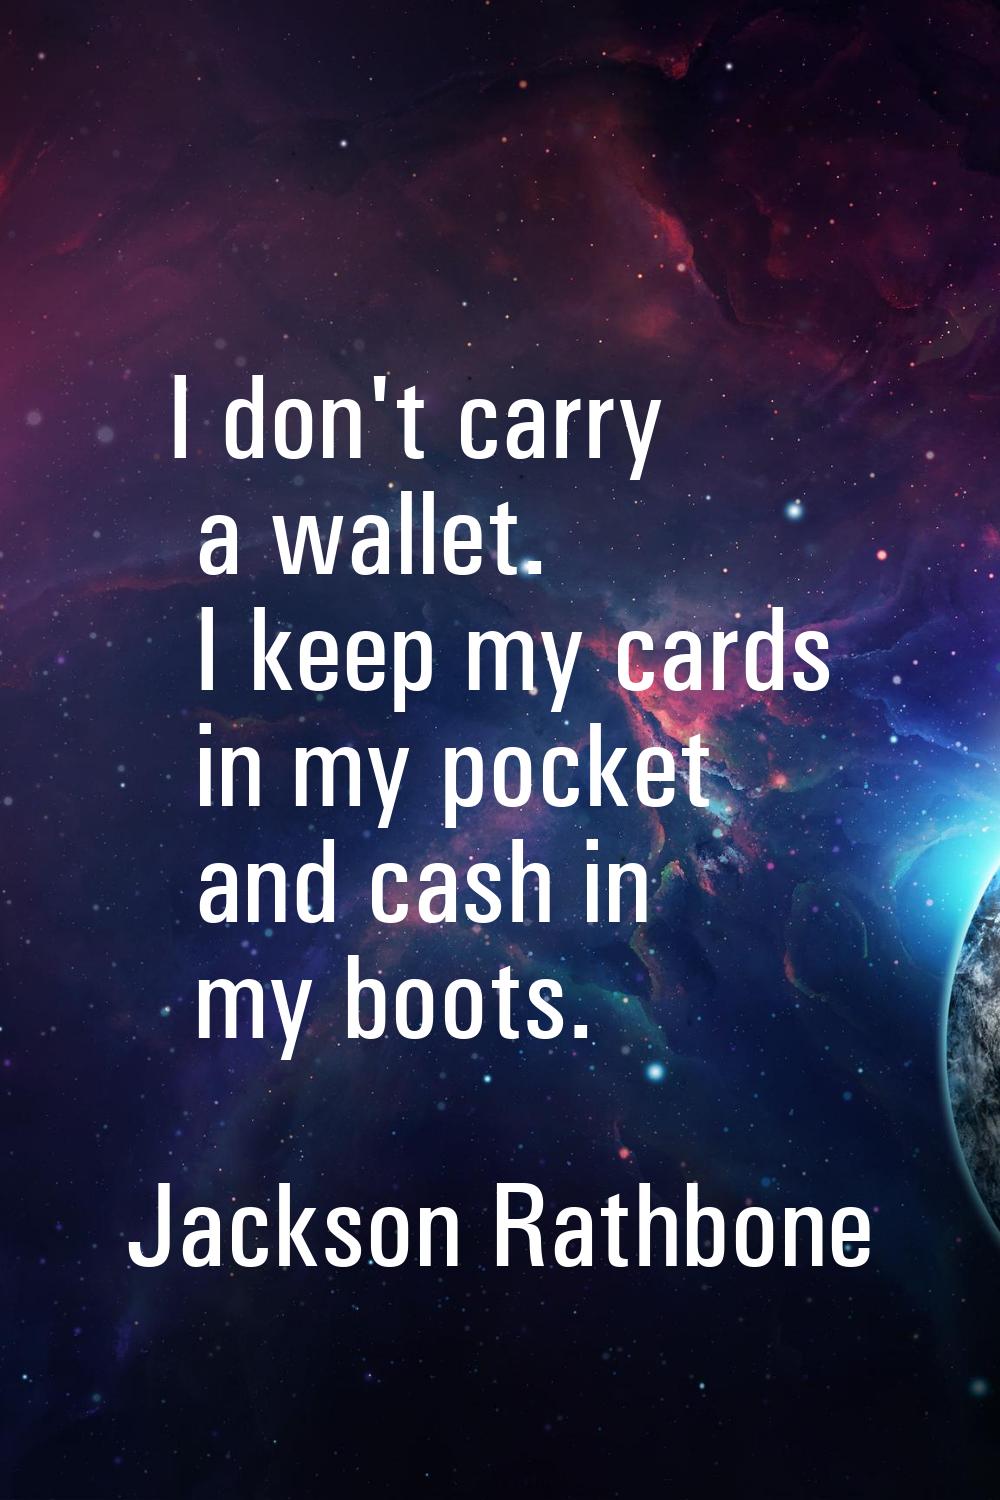 I don't carry a wallet. I keep my cards in my pocket and cash in my boots.